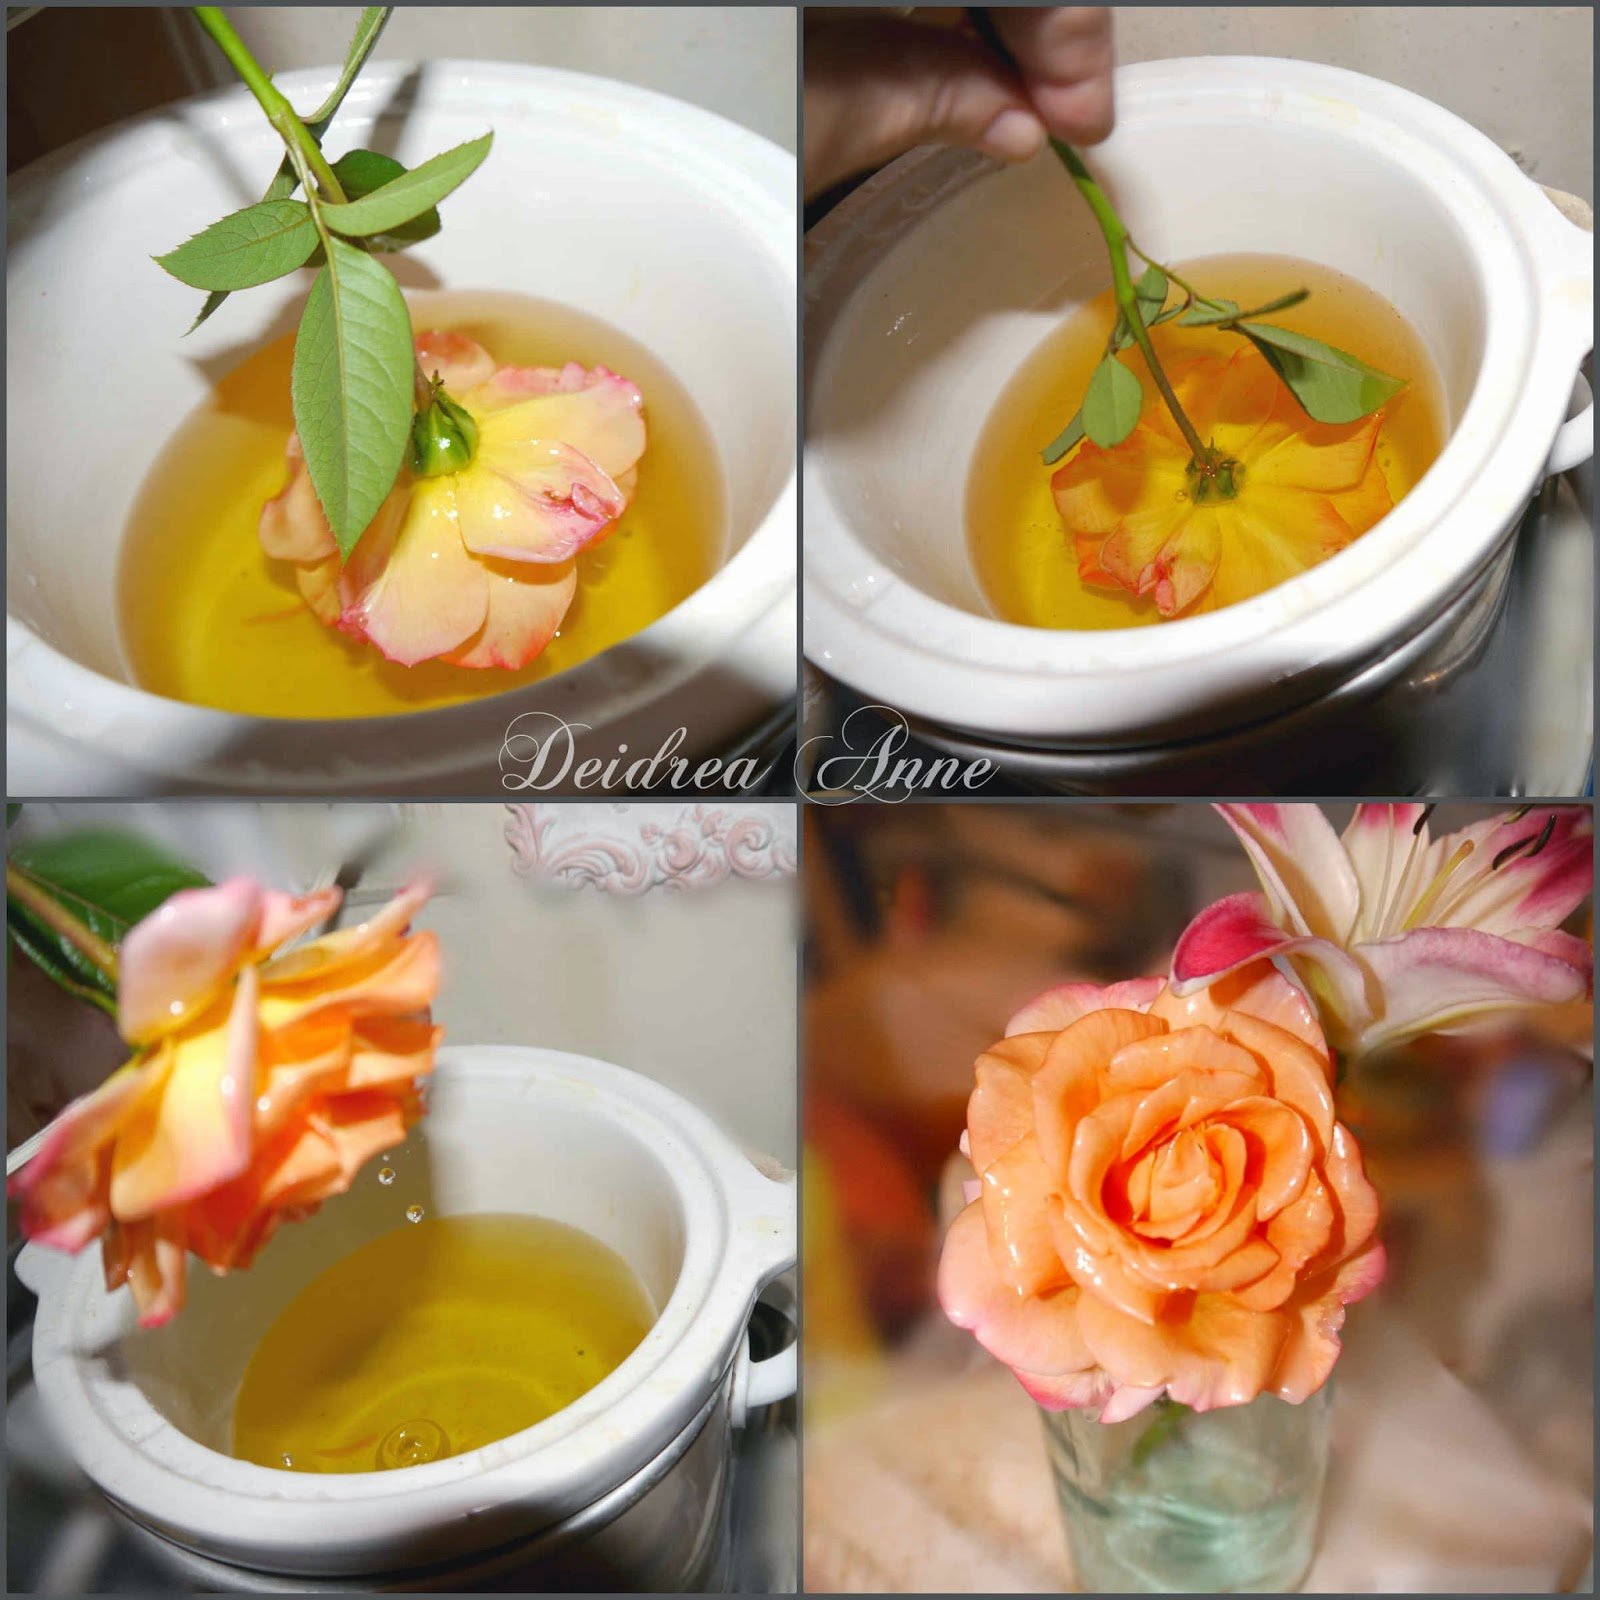 How to Preserve Fresh Flowers With Wax